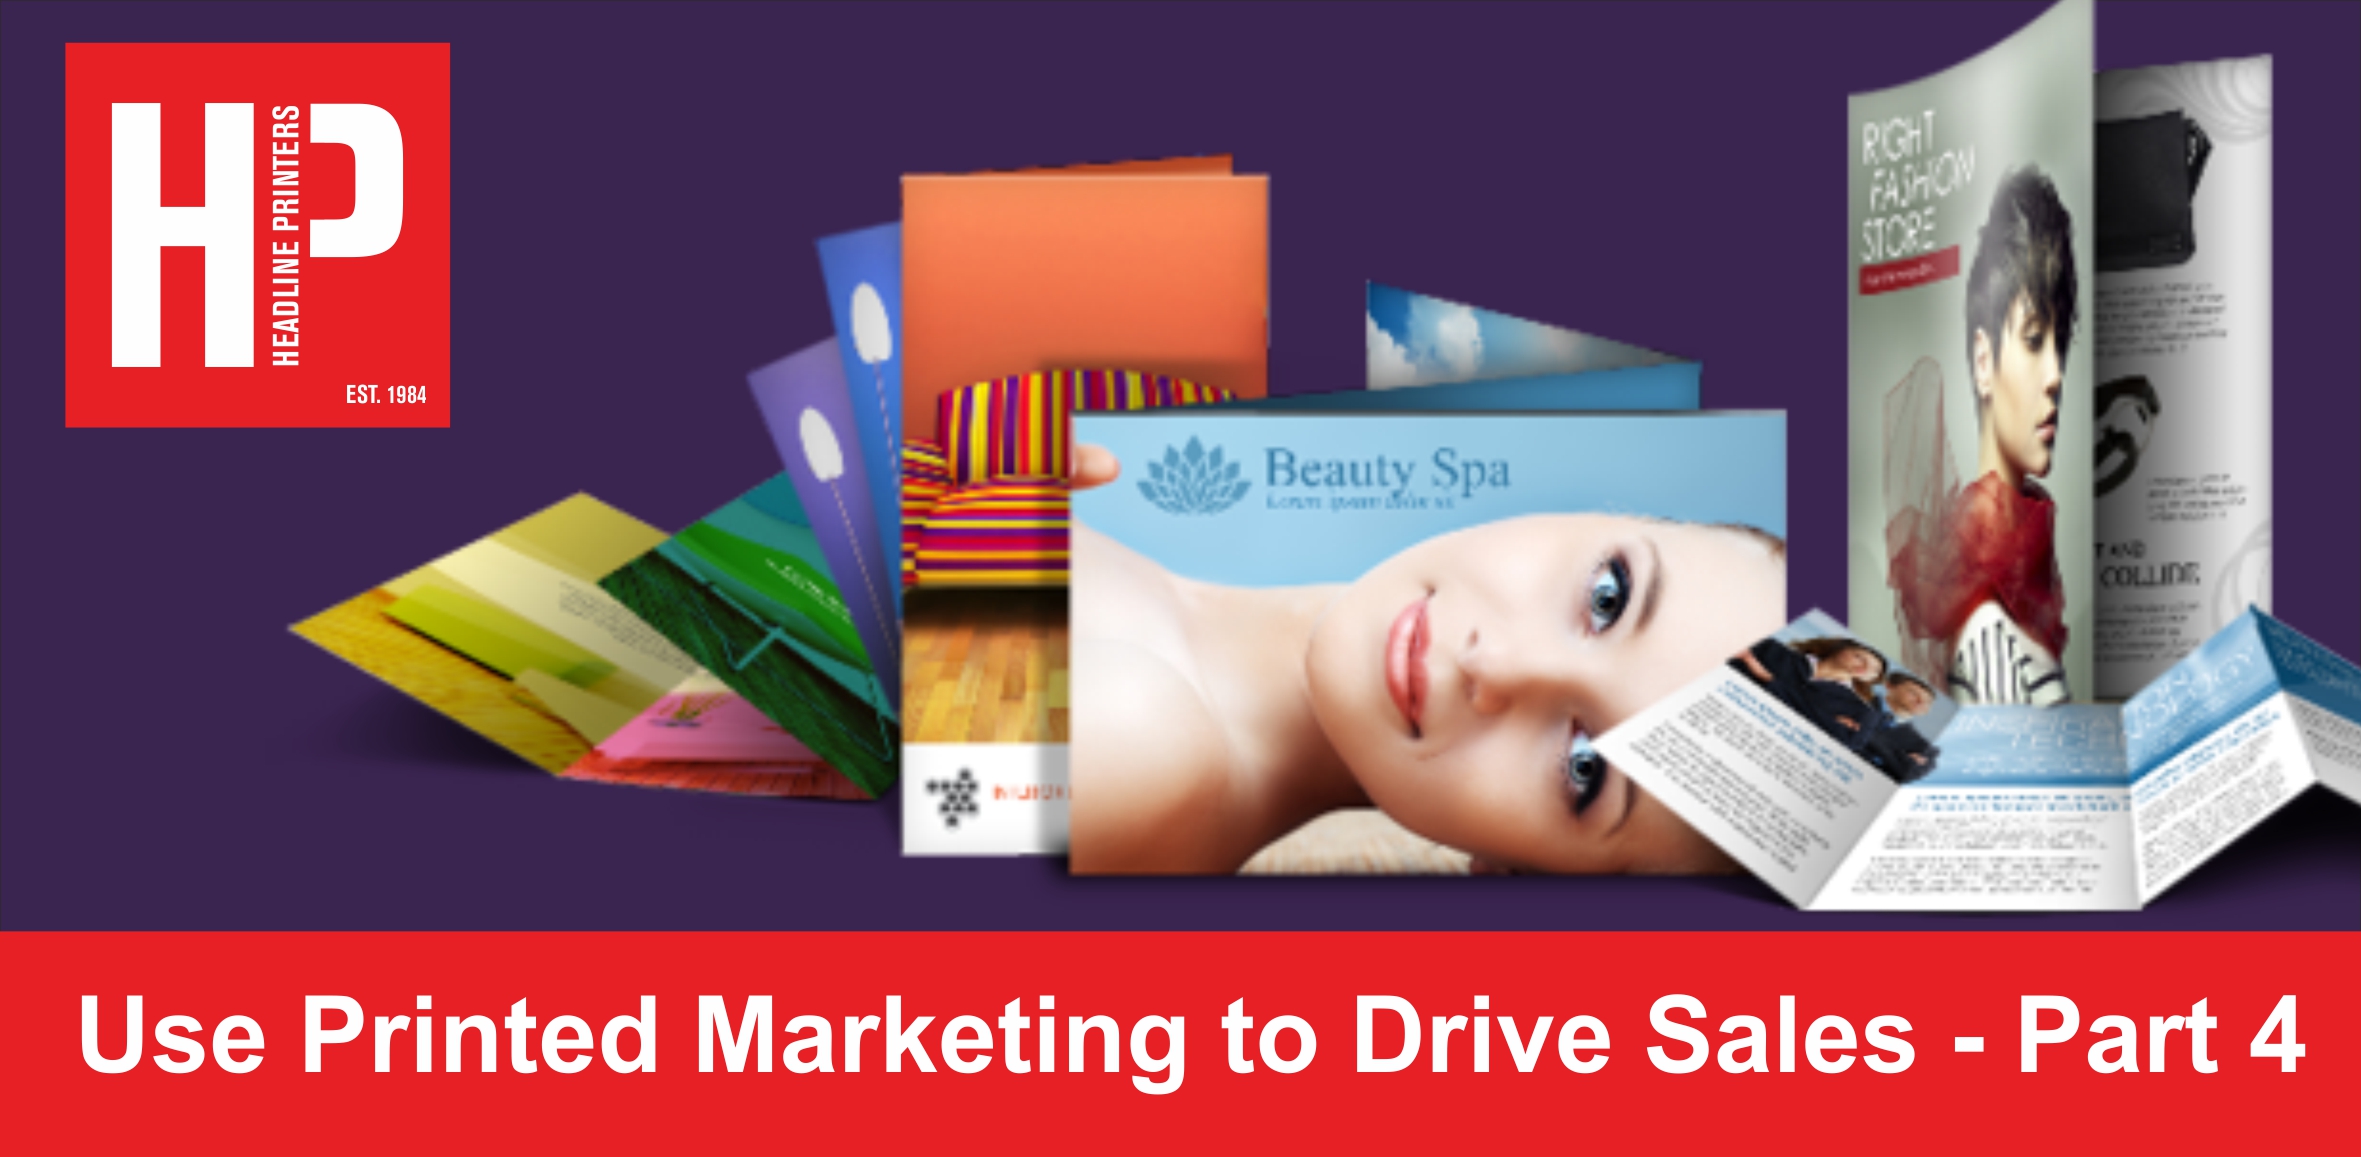 Use Printed Marketing to Drive Sales - Part 4